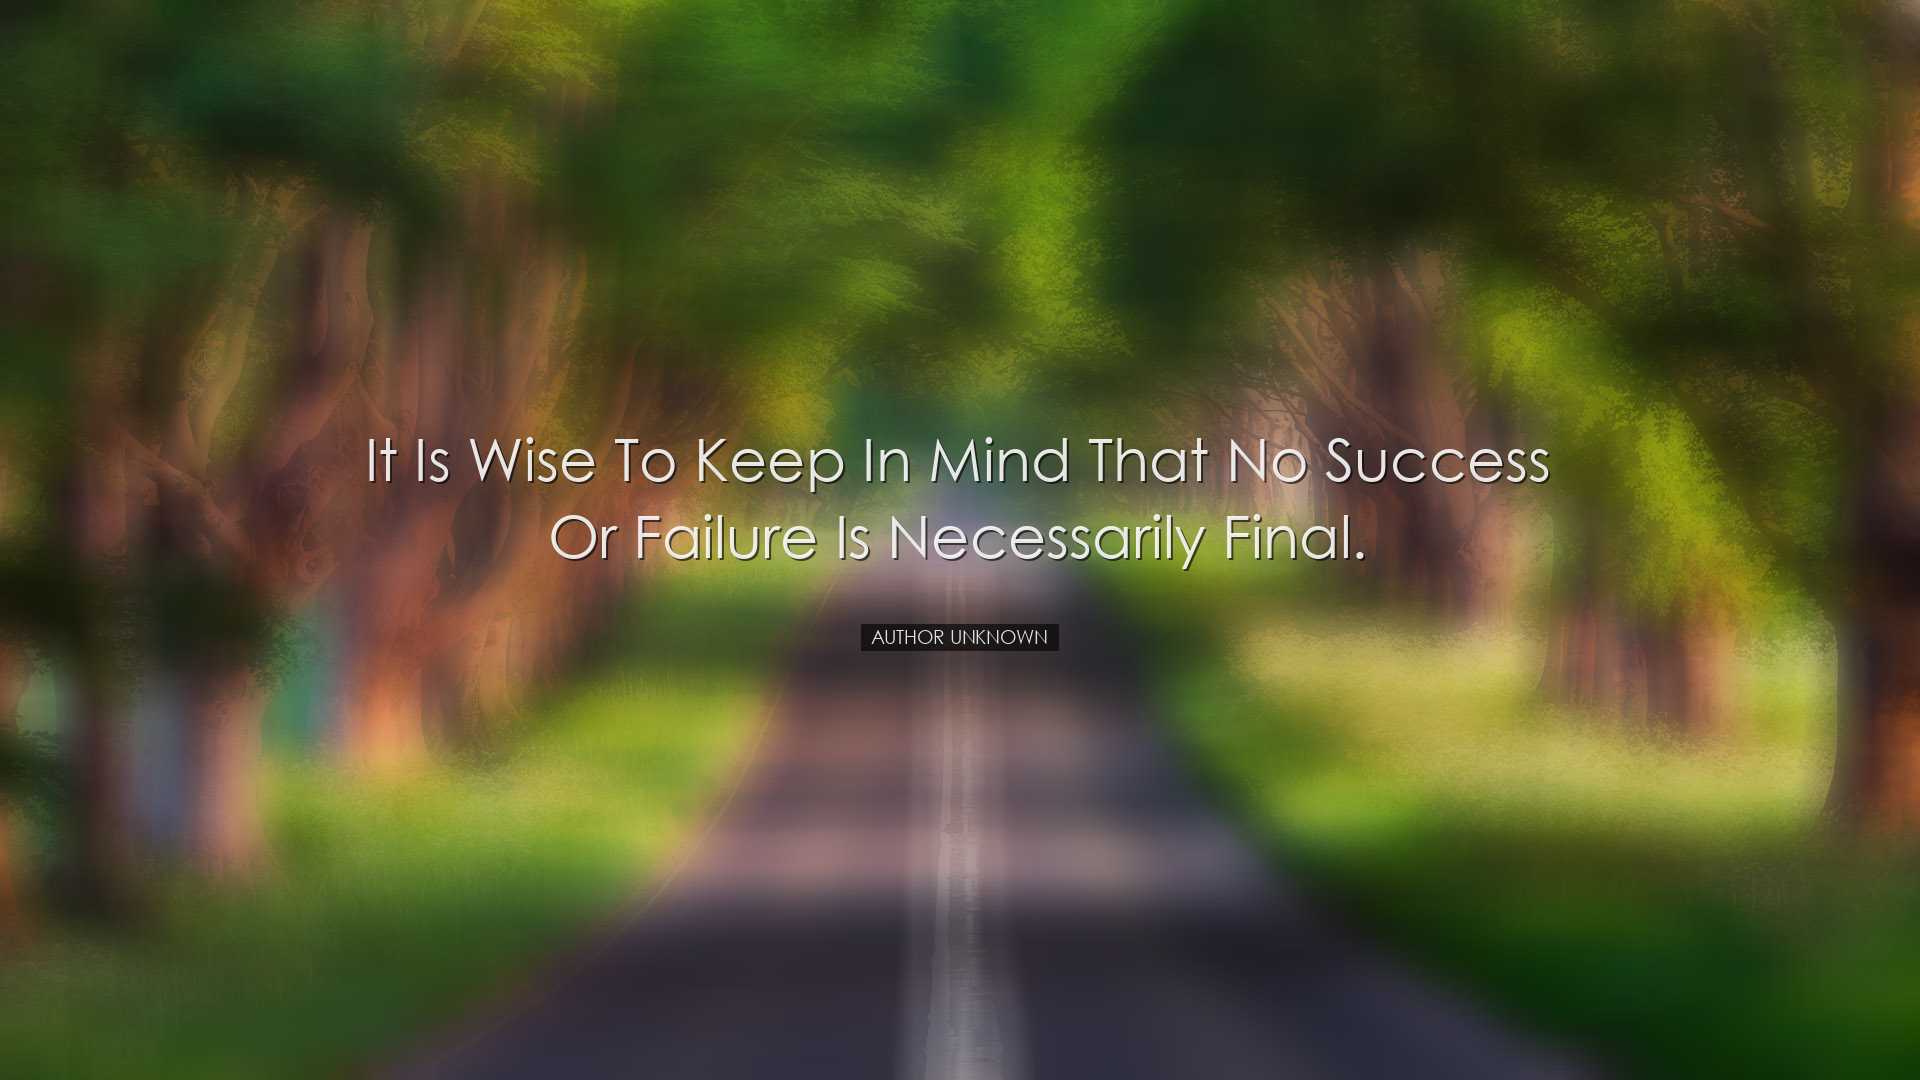 It is wise to keep in mind that no success or failure is necessari